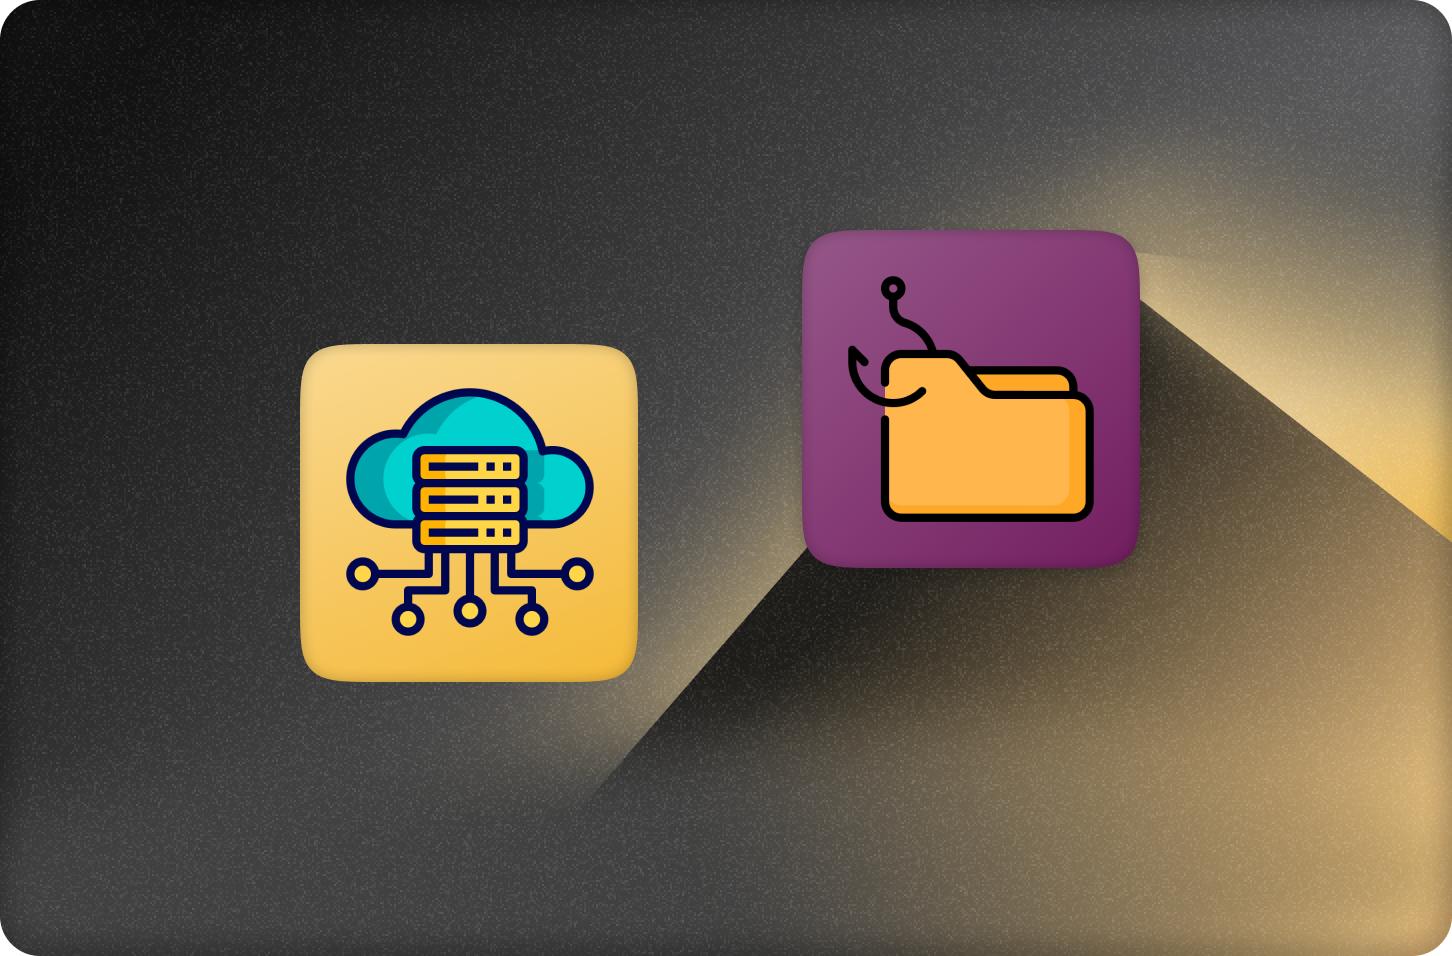 On the left, a distributed server icon, on the right a folder icon with a pirate's hook in it